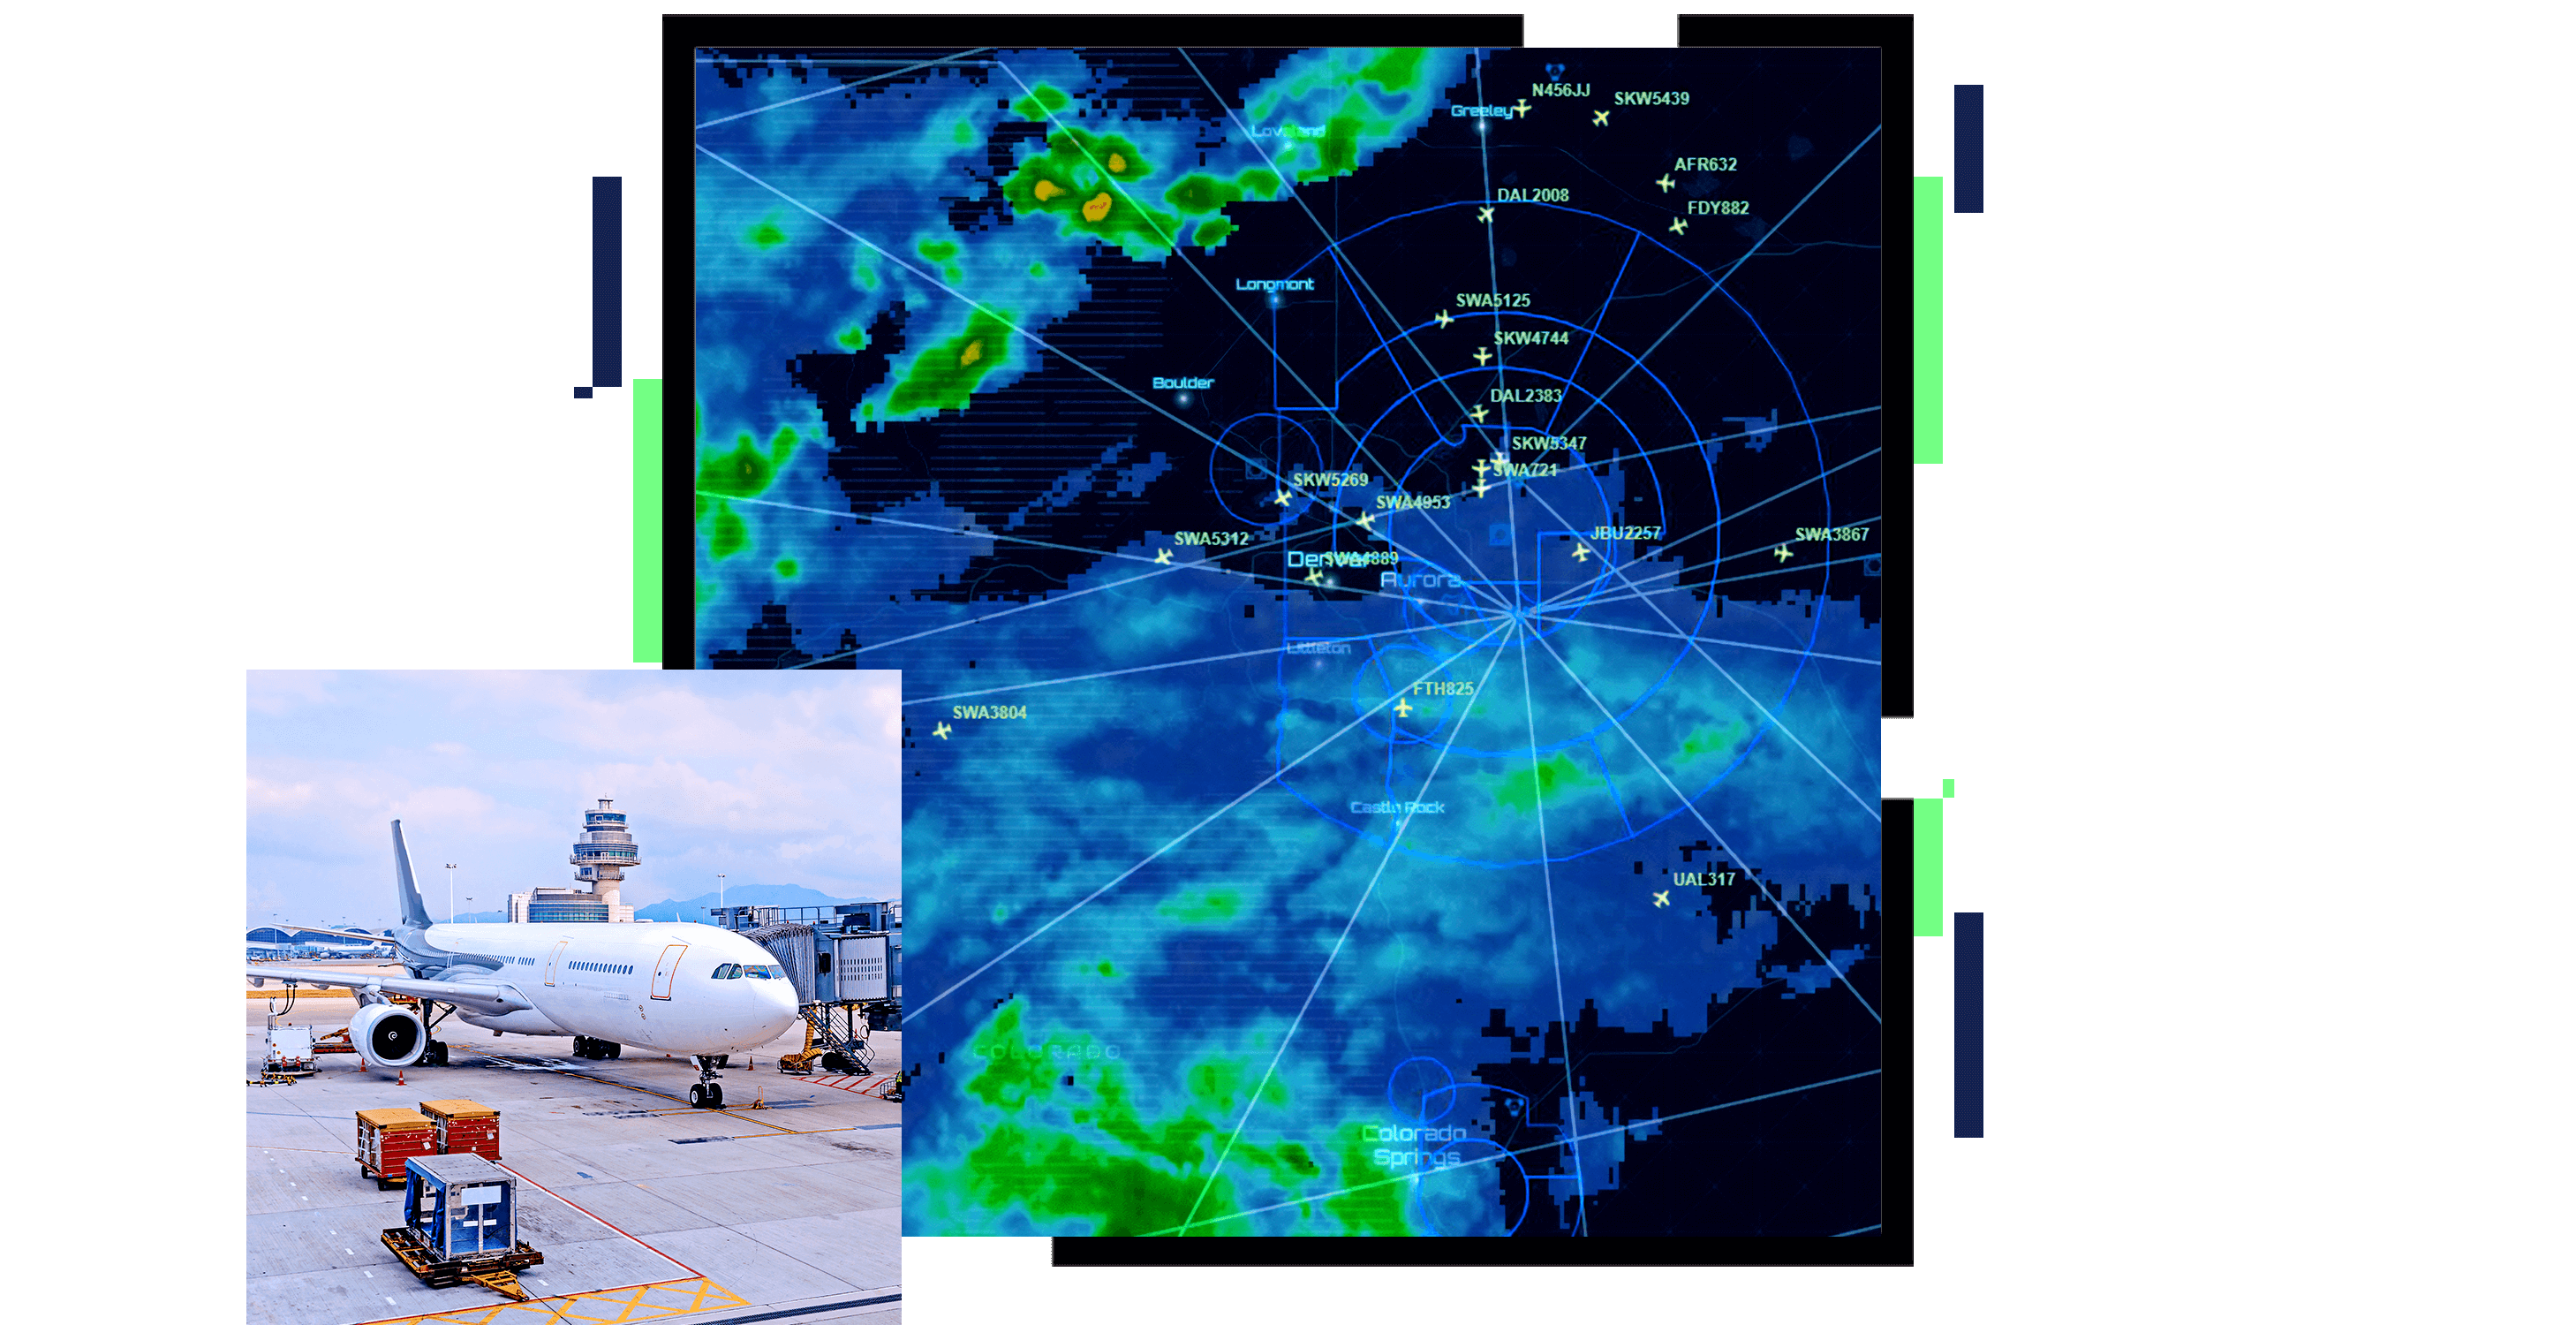 A satellite air traffic map in blue and green overlaid with a photo of an airplane parked on a runway